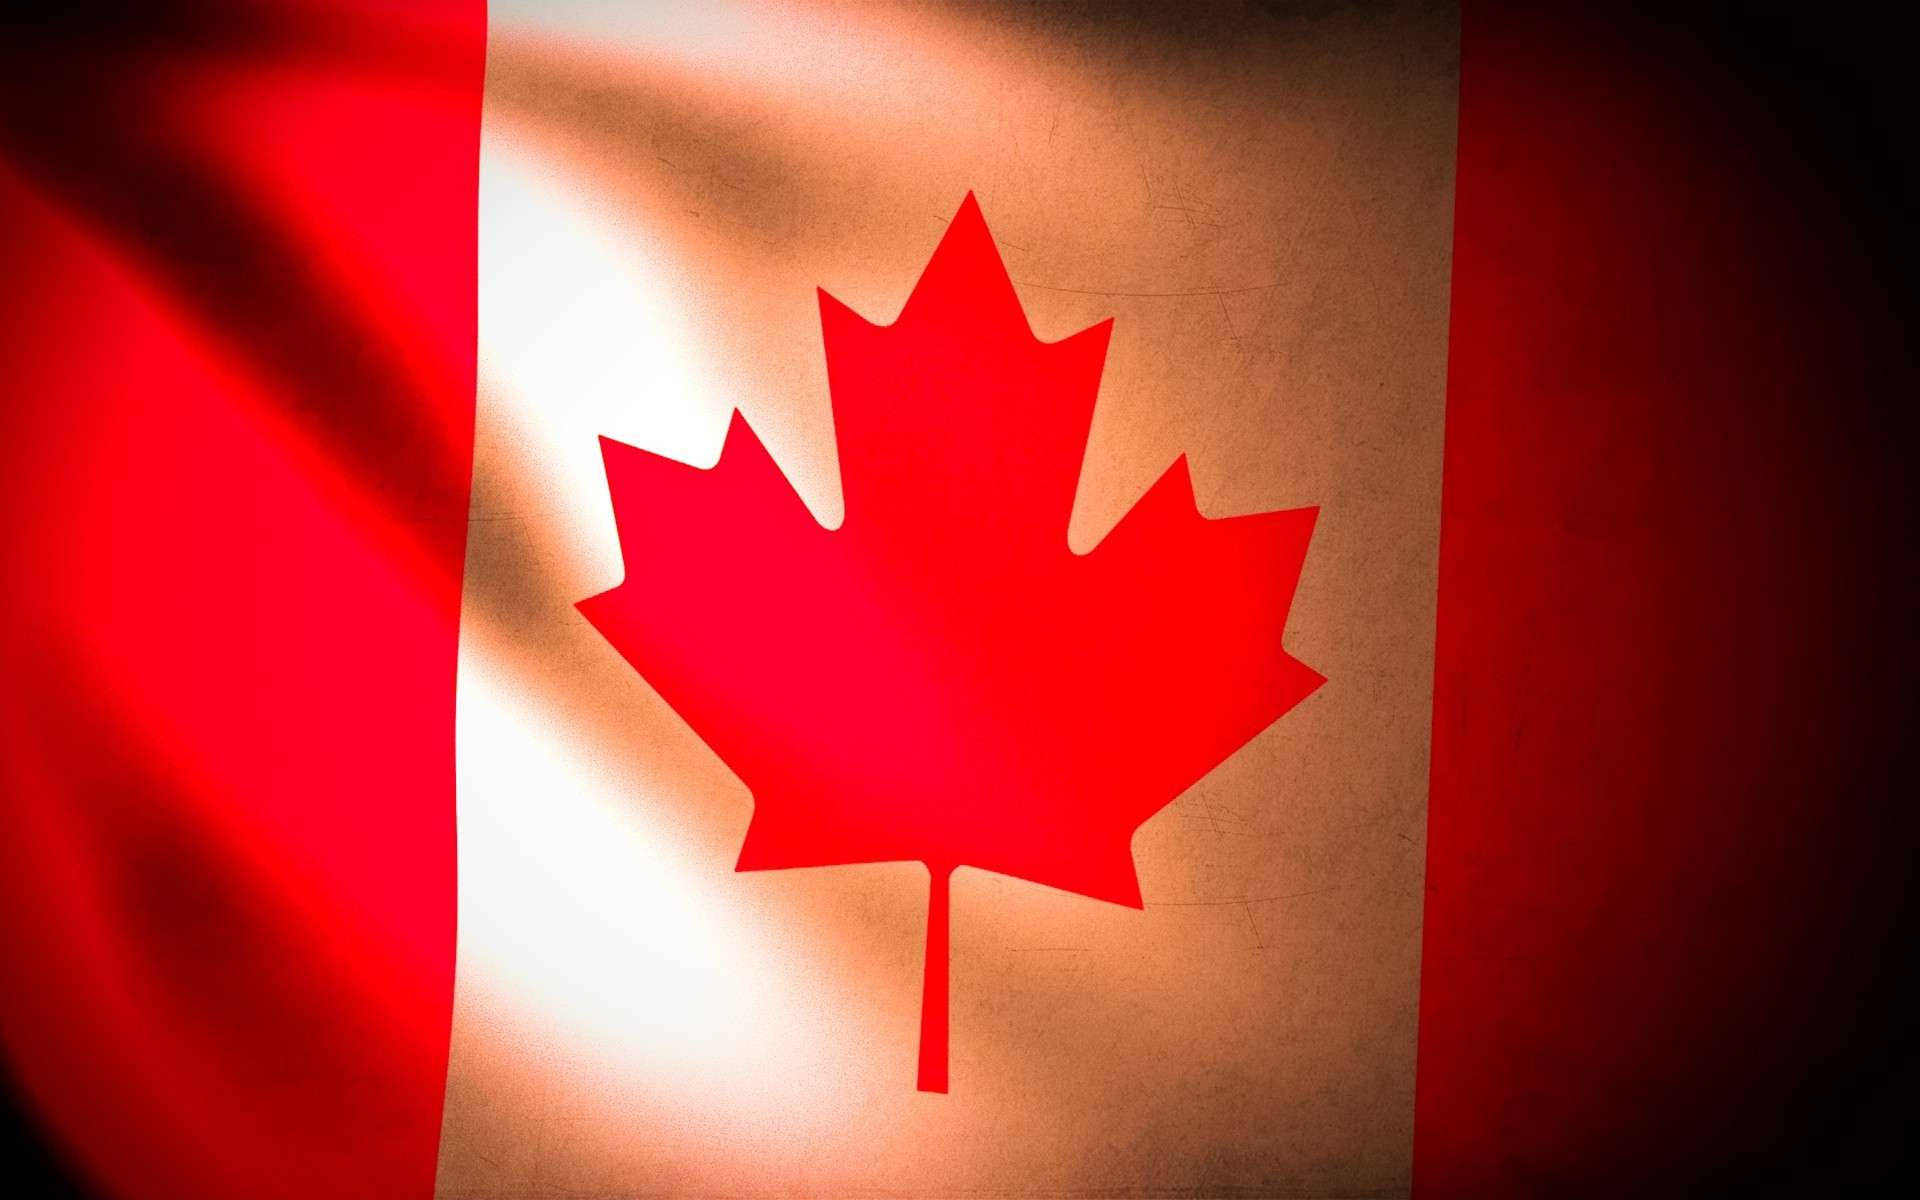 Free Canada Flag Wallpaper Downloads, [100+] Canada Flag Wallpapers for  FREE 